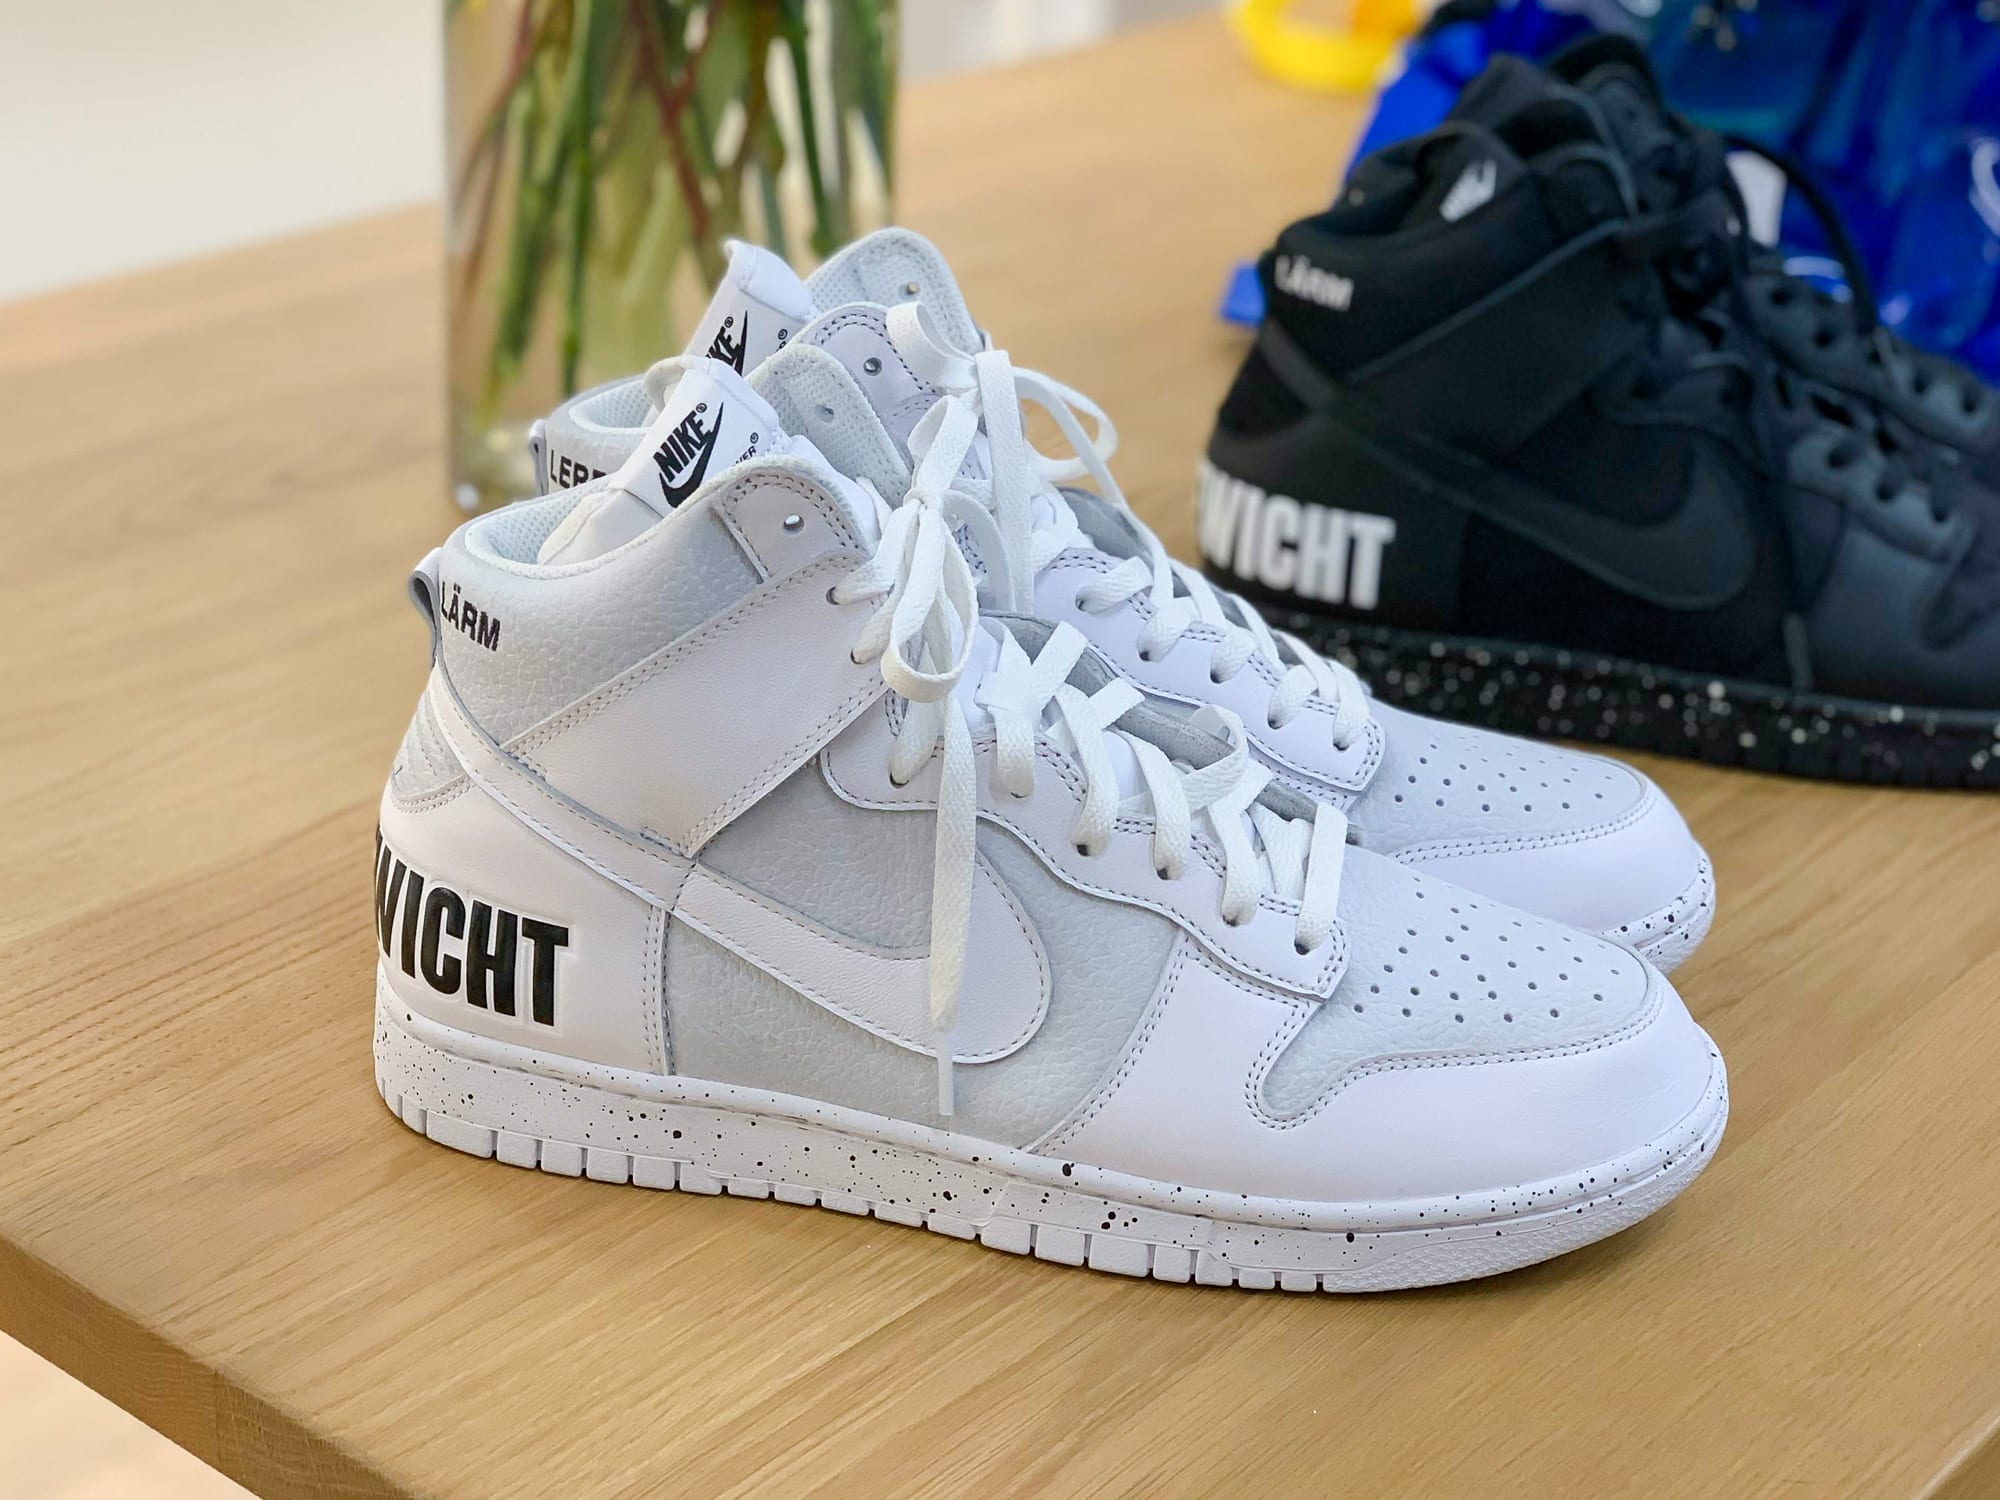 UNDERCOVER Nike Dunk High Chaos DQ4121-001 Release Date